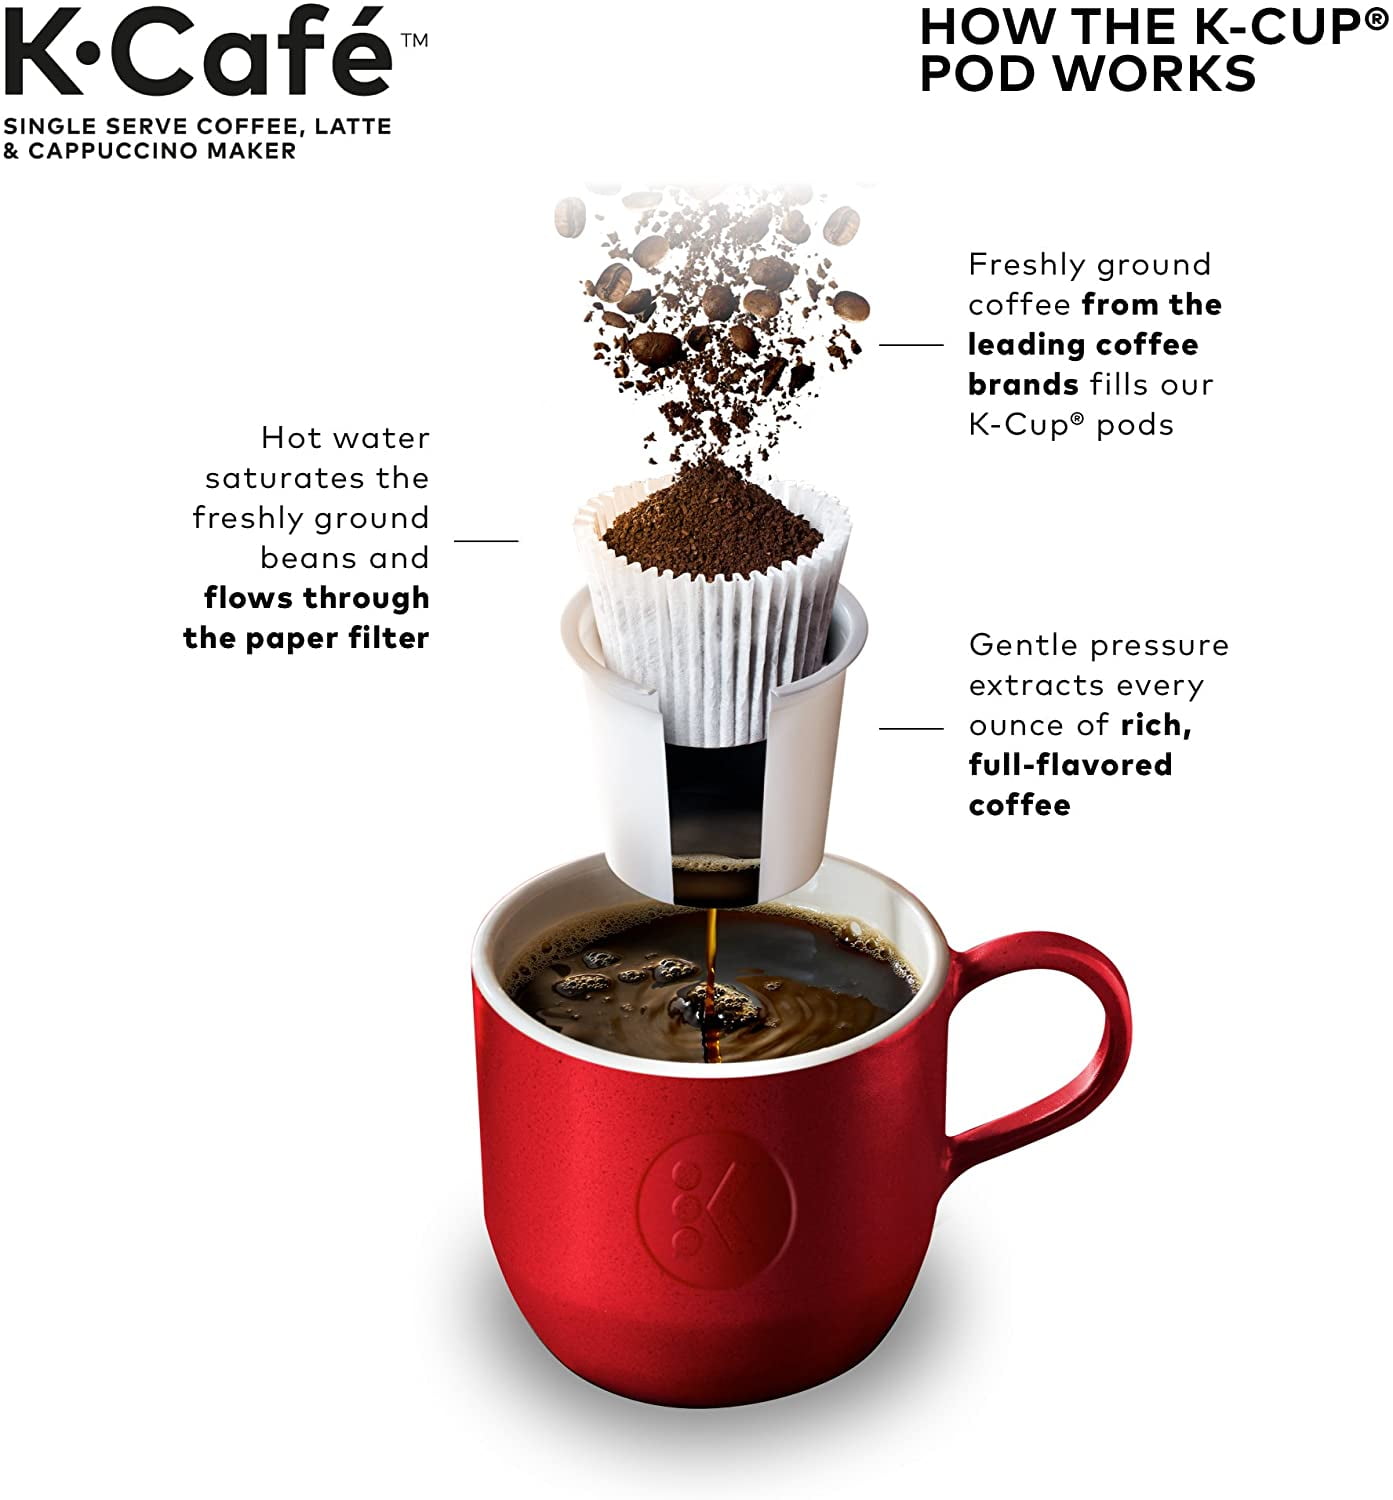 Keurig K-Café Single Serve K-Cup Pod Coffee, Latte and Cappuccino Maker,  with Milk Frother for Speciality Beverages…